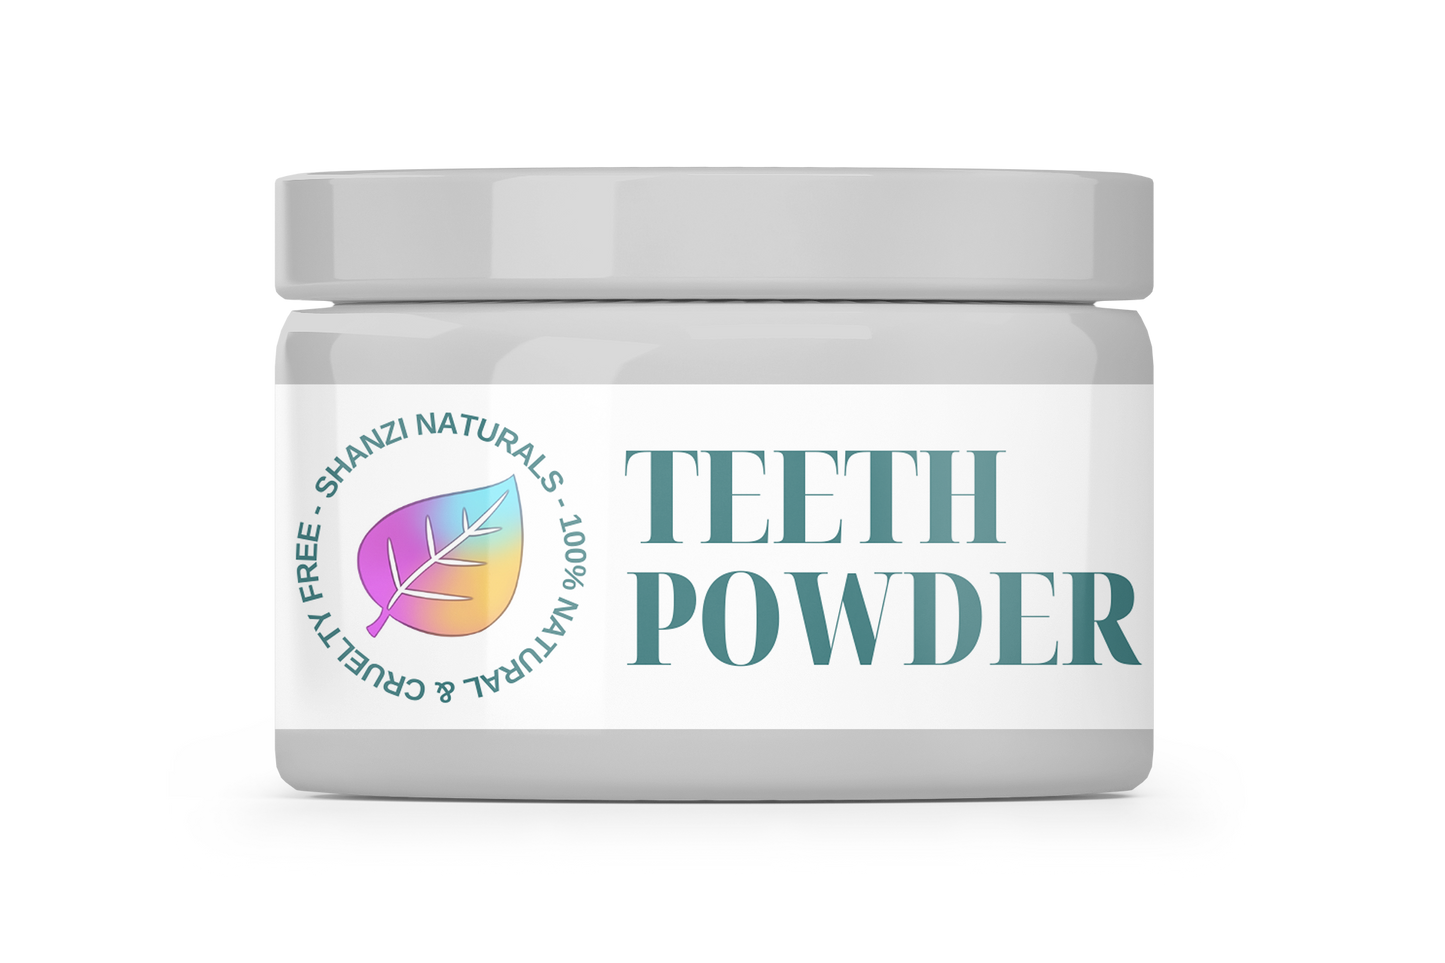 natural teeth cleaning powder- flavourless. non minty toothpaste,